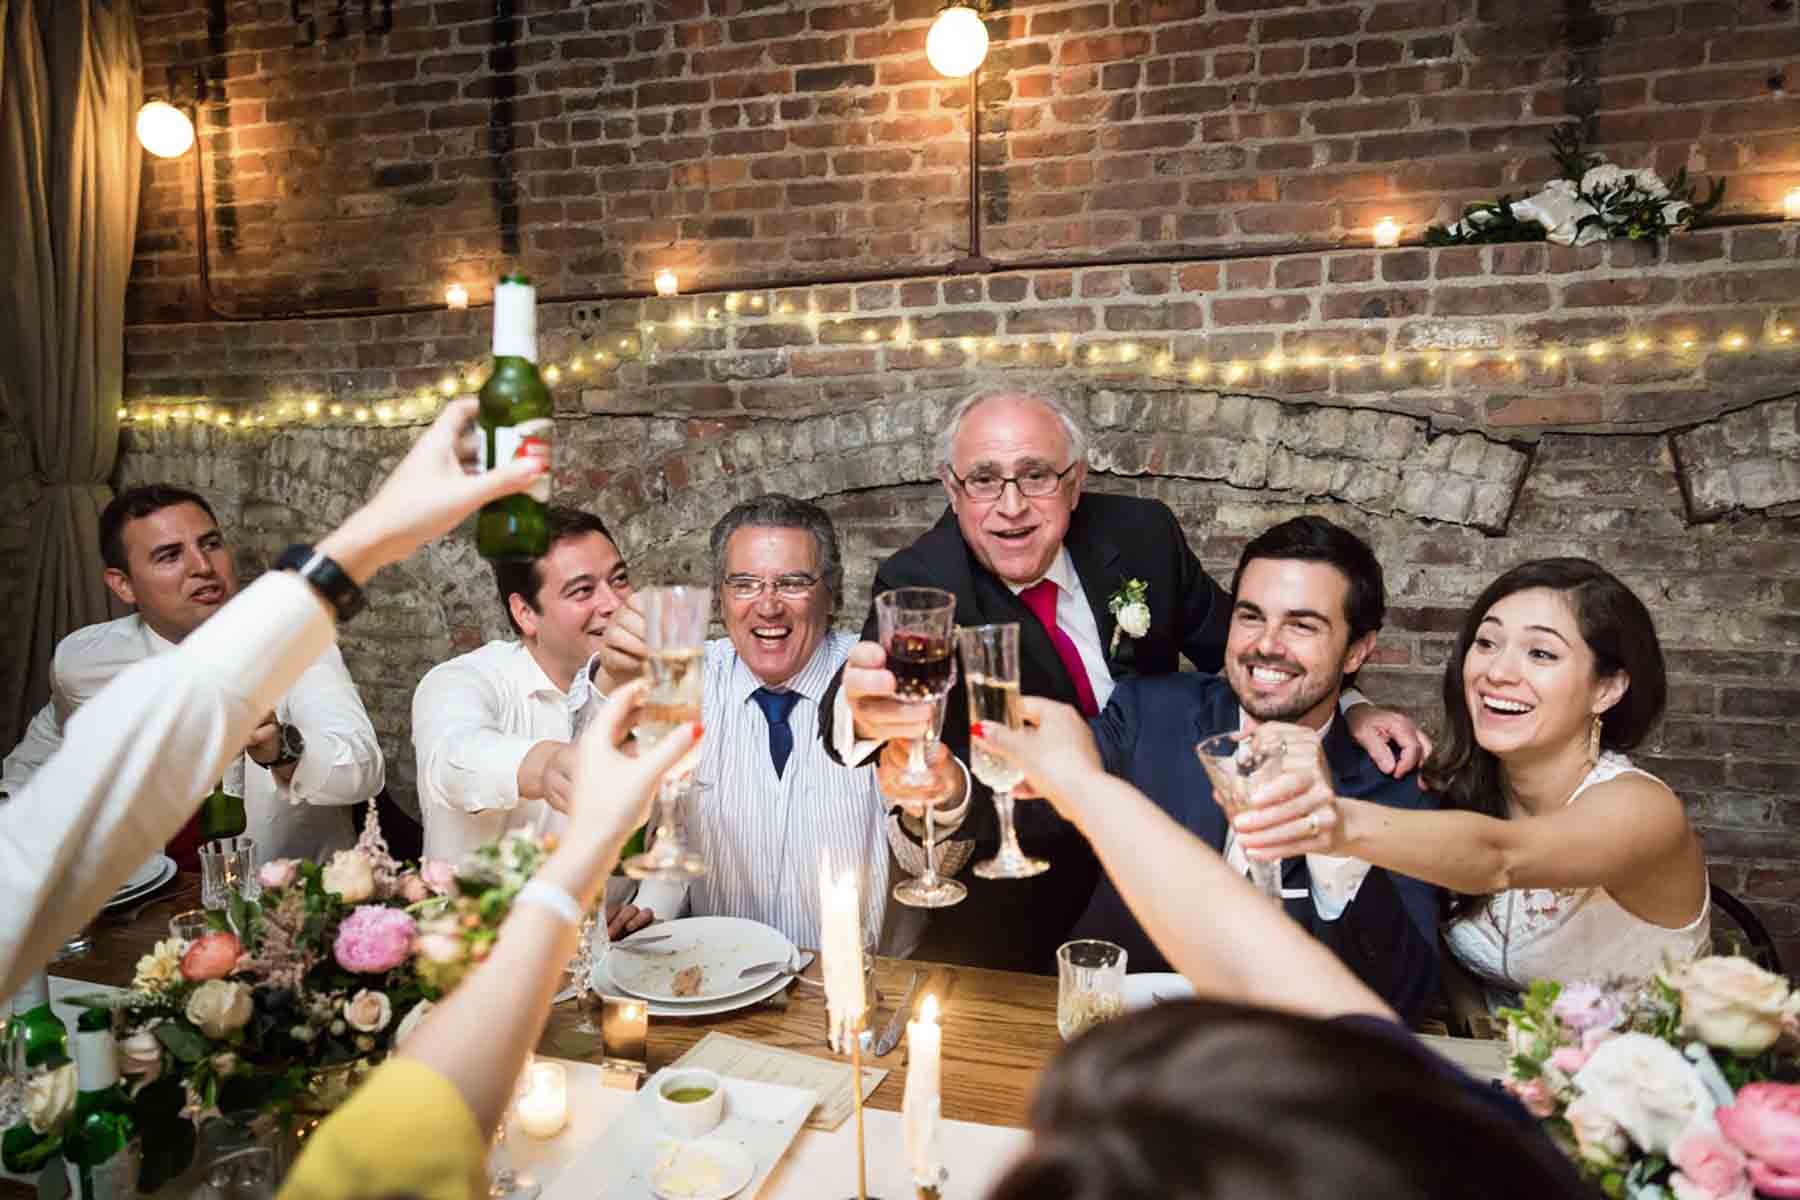 Guests toasting with glasses during wedding reception for an article on how to save money on wedding photography